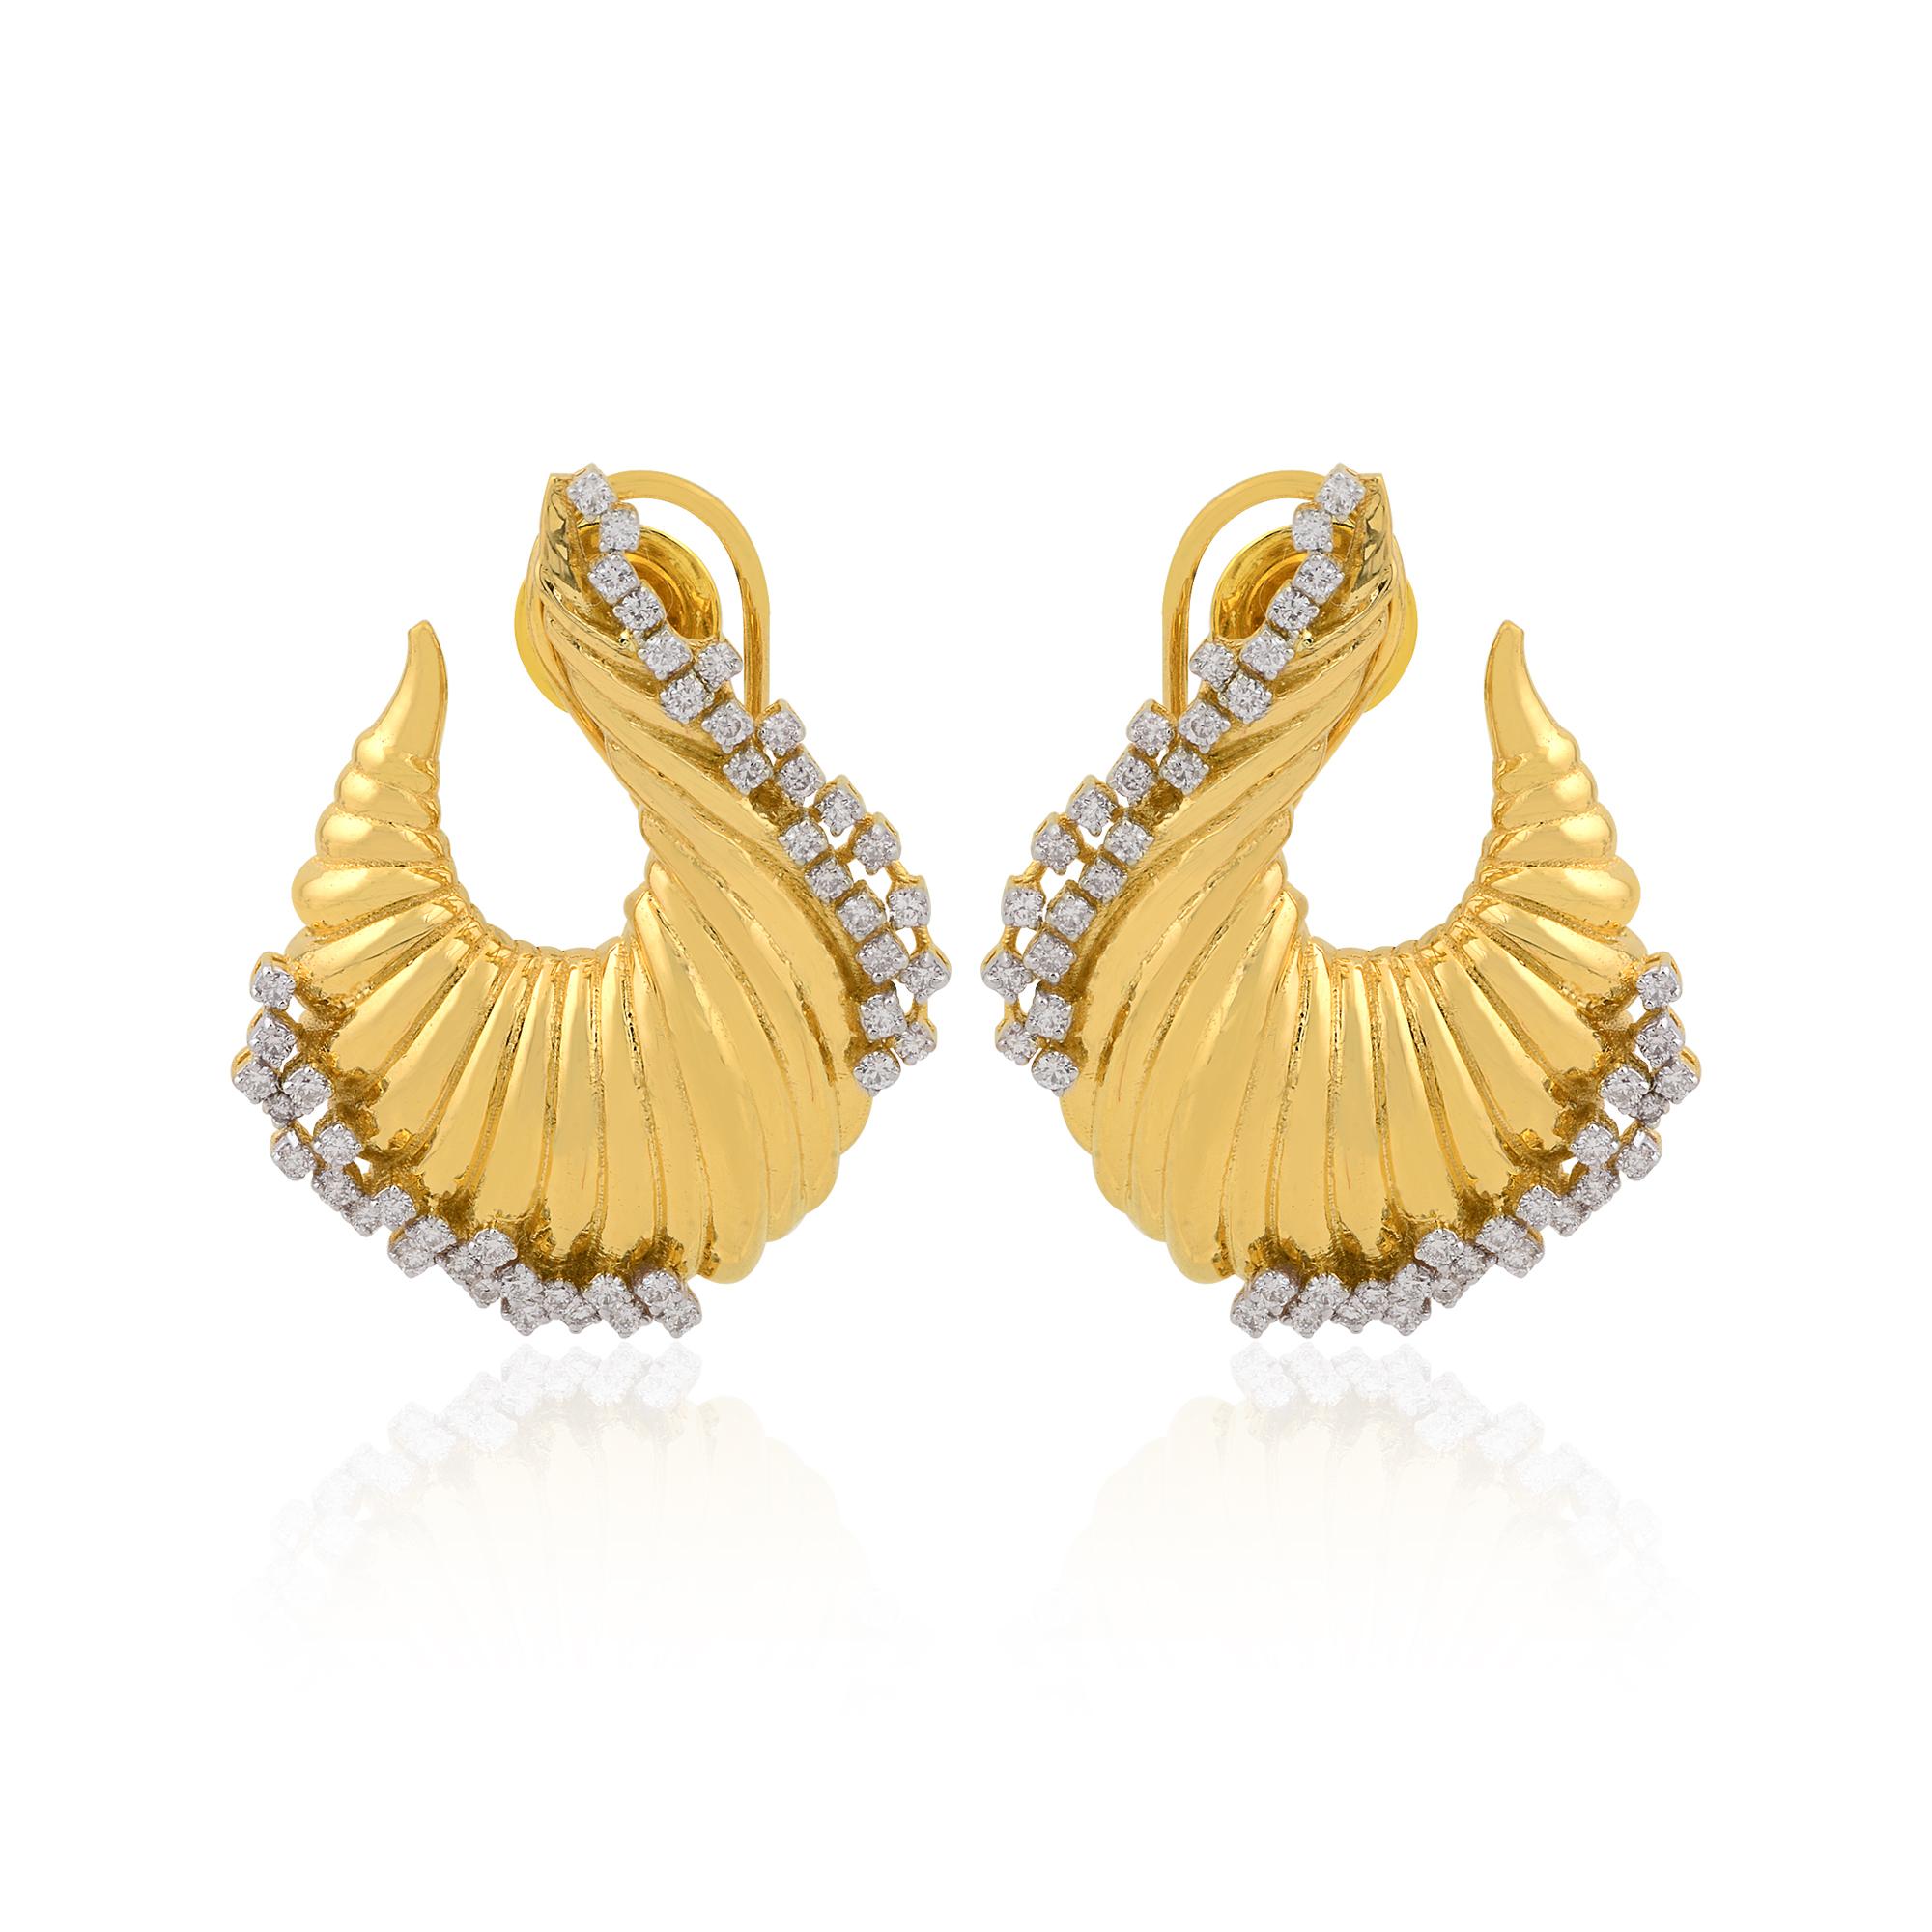 Item Code :- SEE-1674A
Gross Weight :- 11.73 gm
18k Solid Yellow Gold Weight :- 11.56 gm
Natural Diamond Weight :- 0.85 carat  ( AVERAGE DIAMOND CLARITY SI1-SI2 & COLOR H-I )
Earrings Size :- 29x20 mm approx.

✦ Sizing
.....................
We can